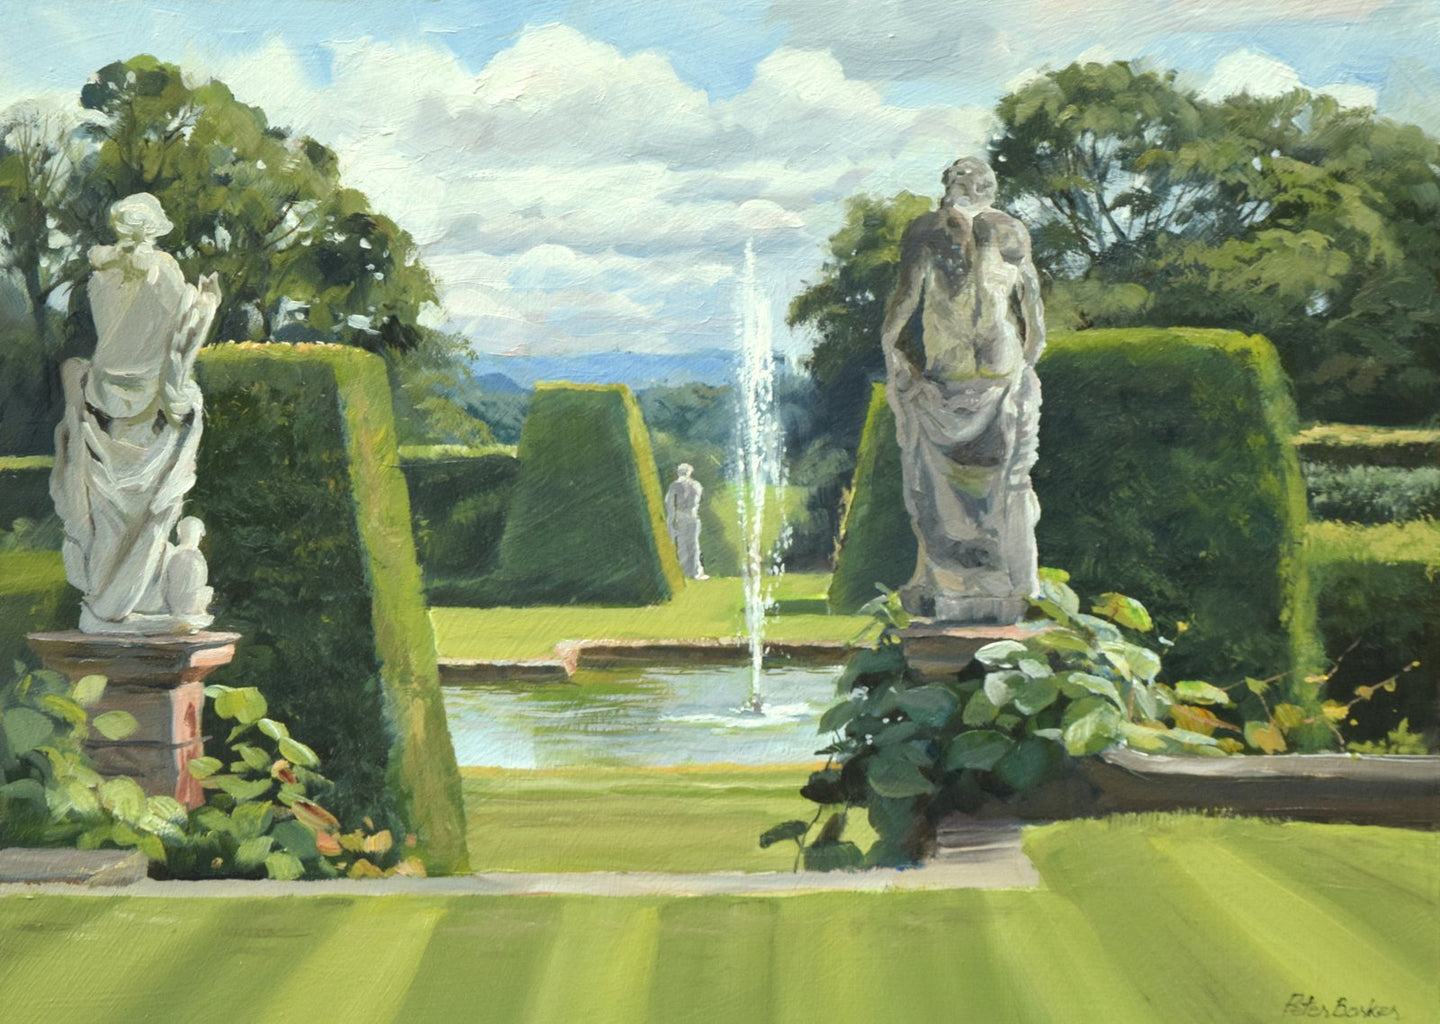 10 x 14 inch oil, painted on site at Renishaw Hall Garden, with stone statues on stone plinths facing away from the viewer, down towards open countryside beyond